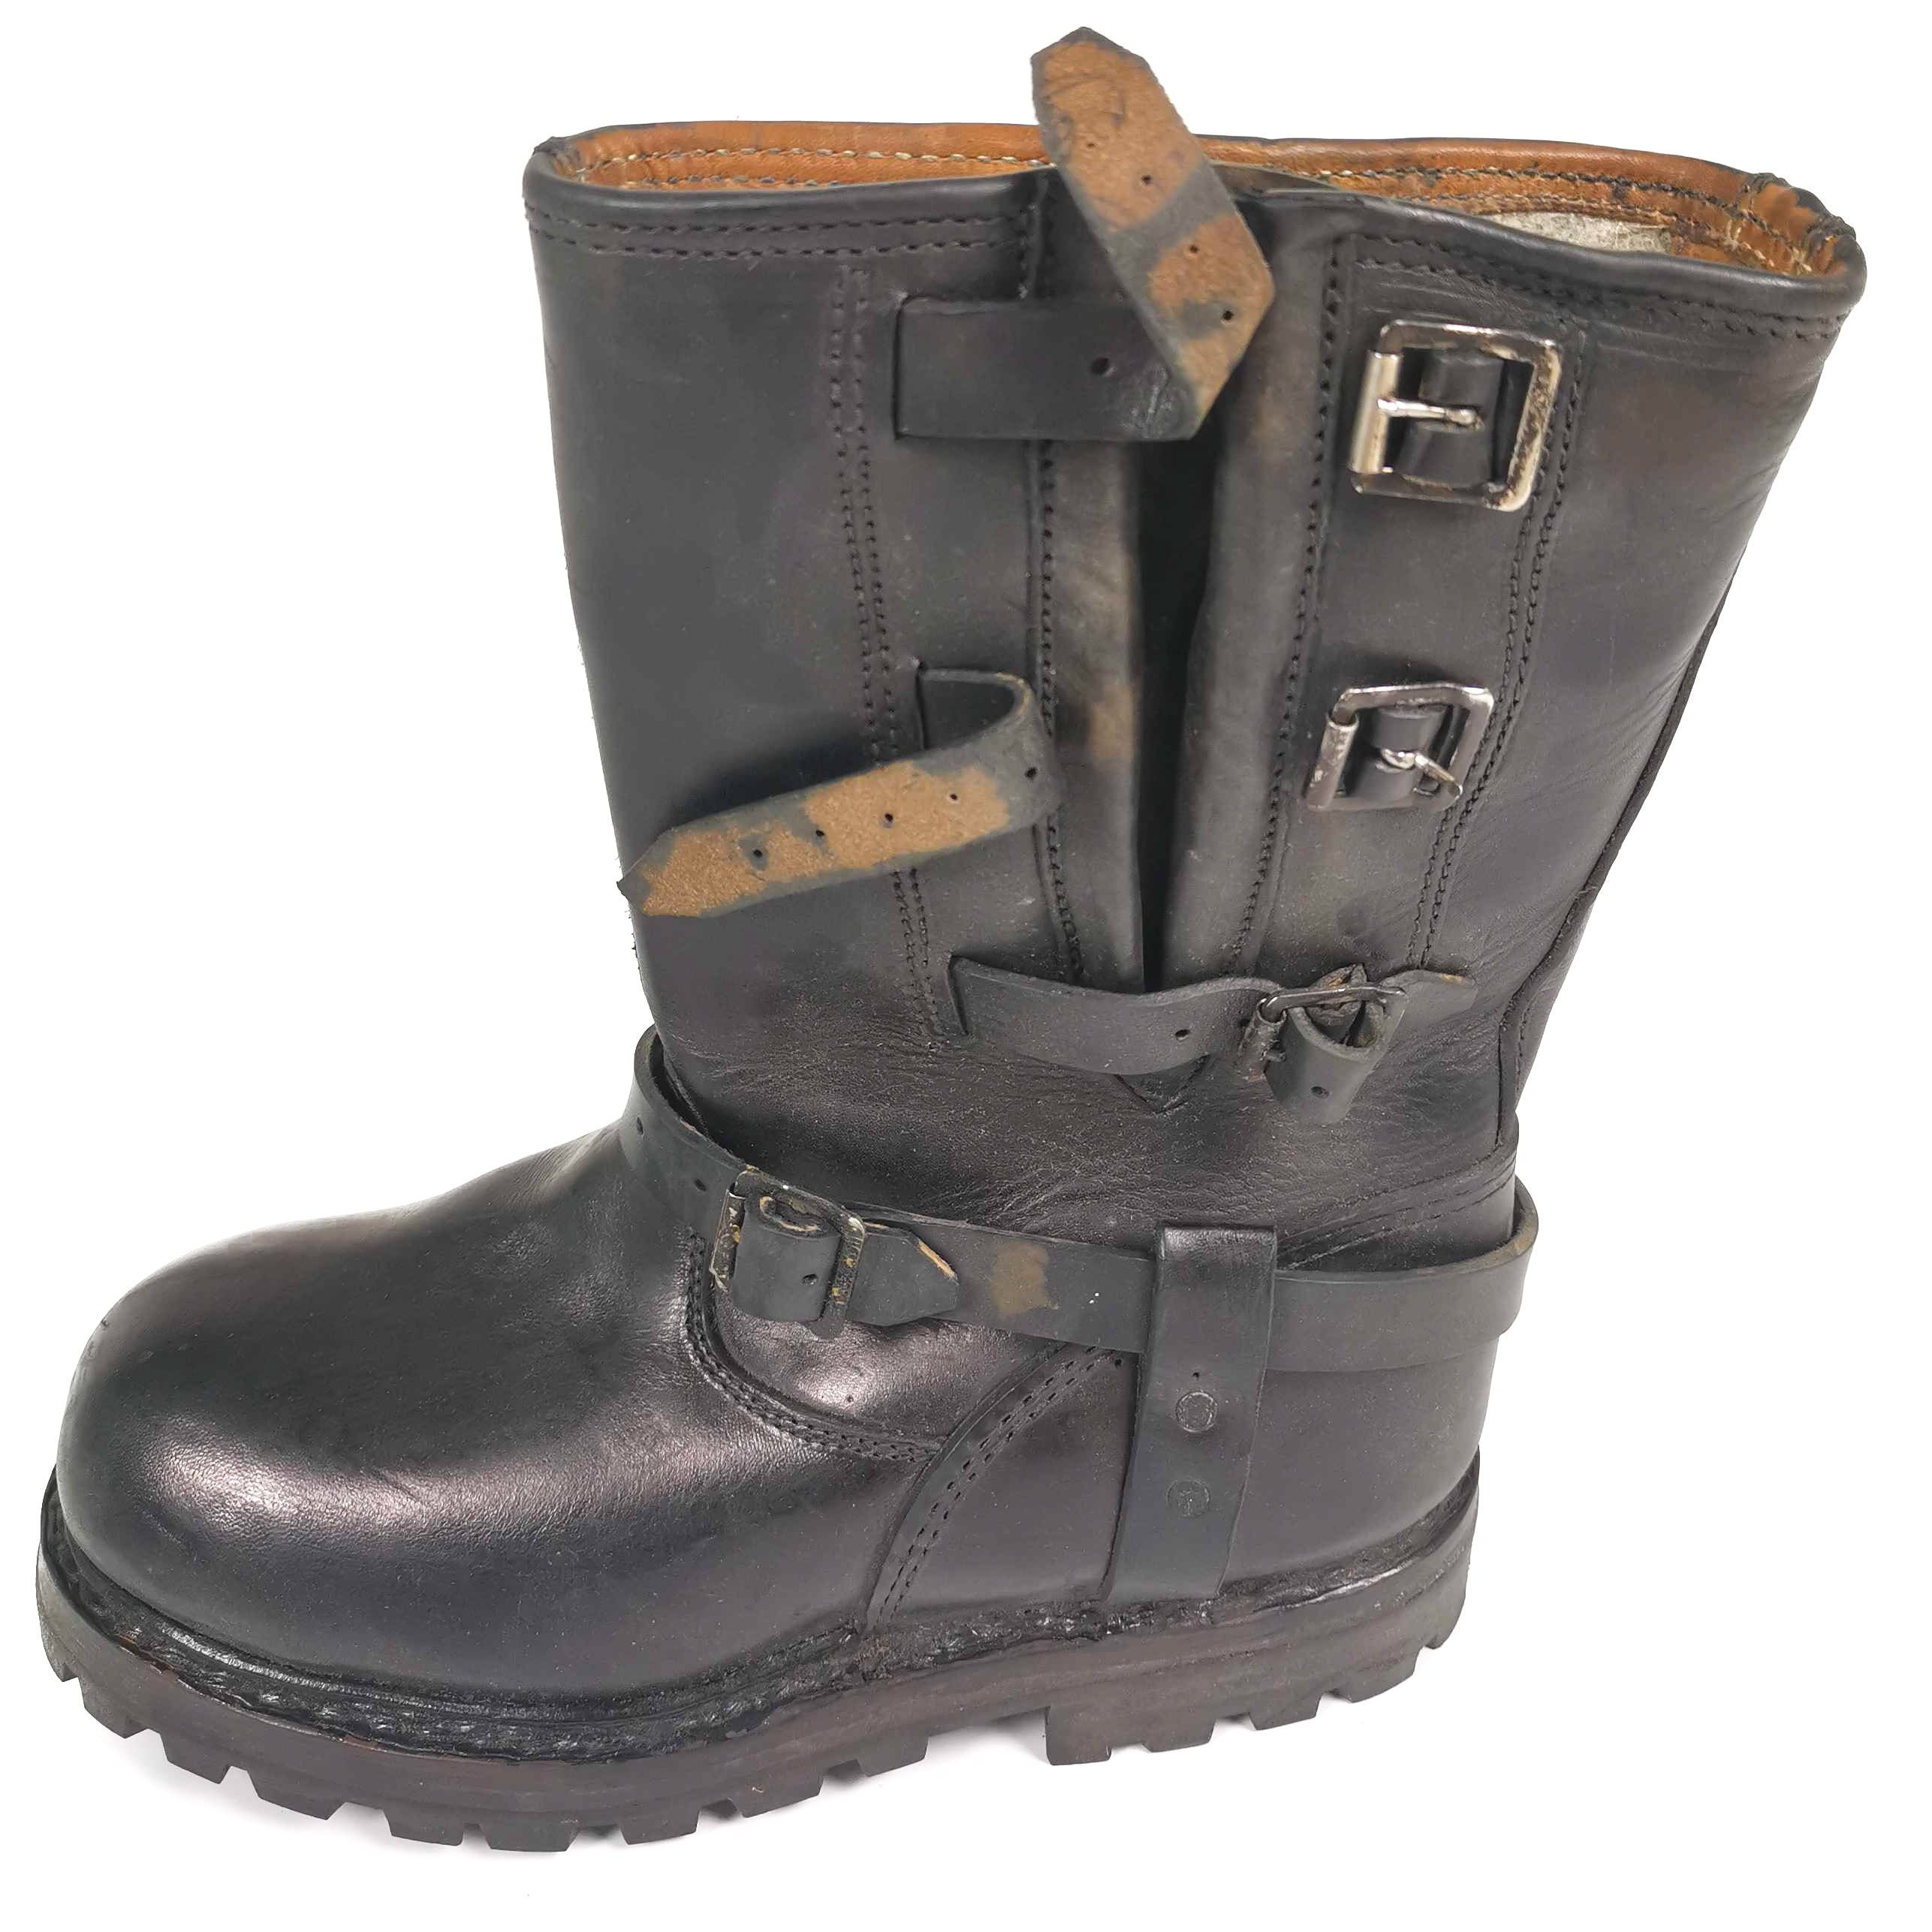 Austrian Army Boots - Army Military